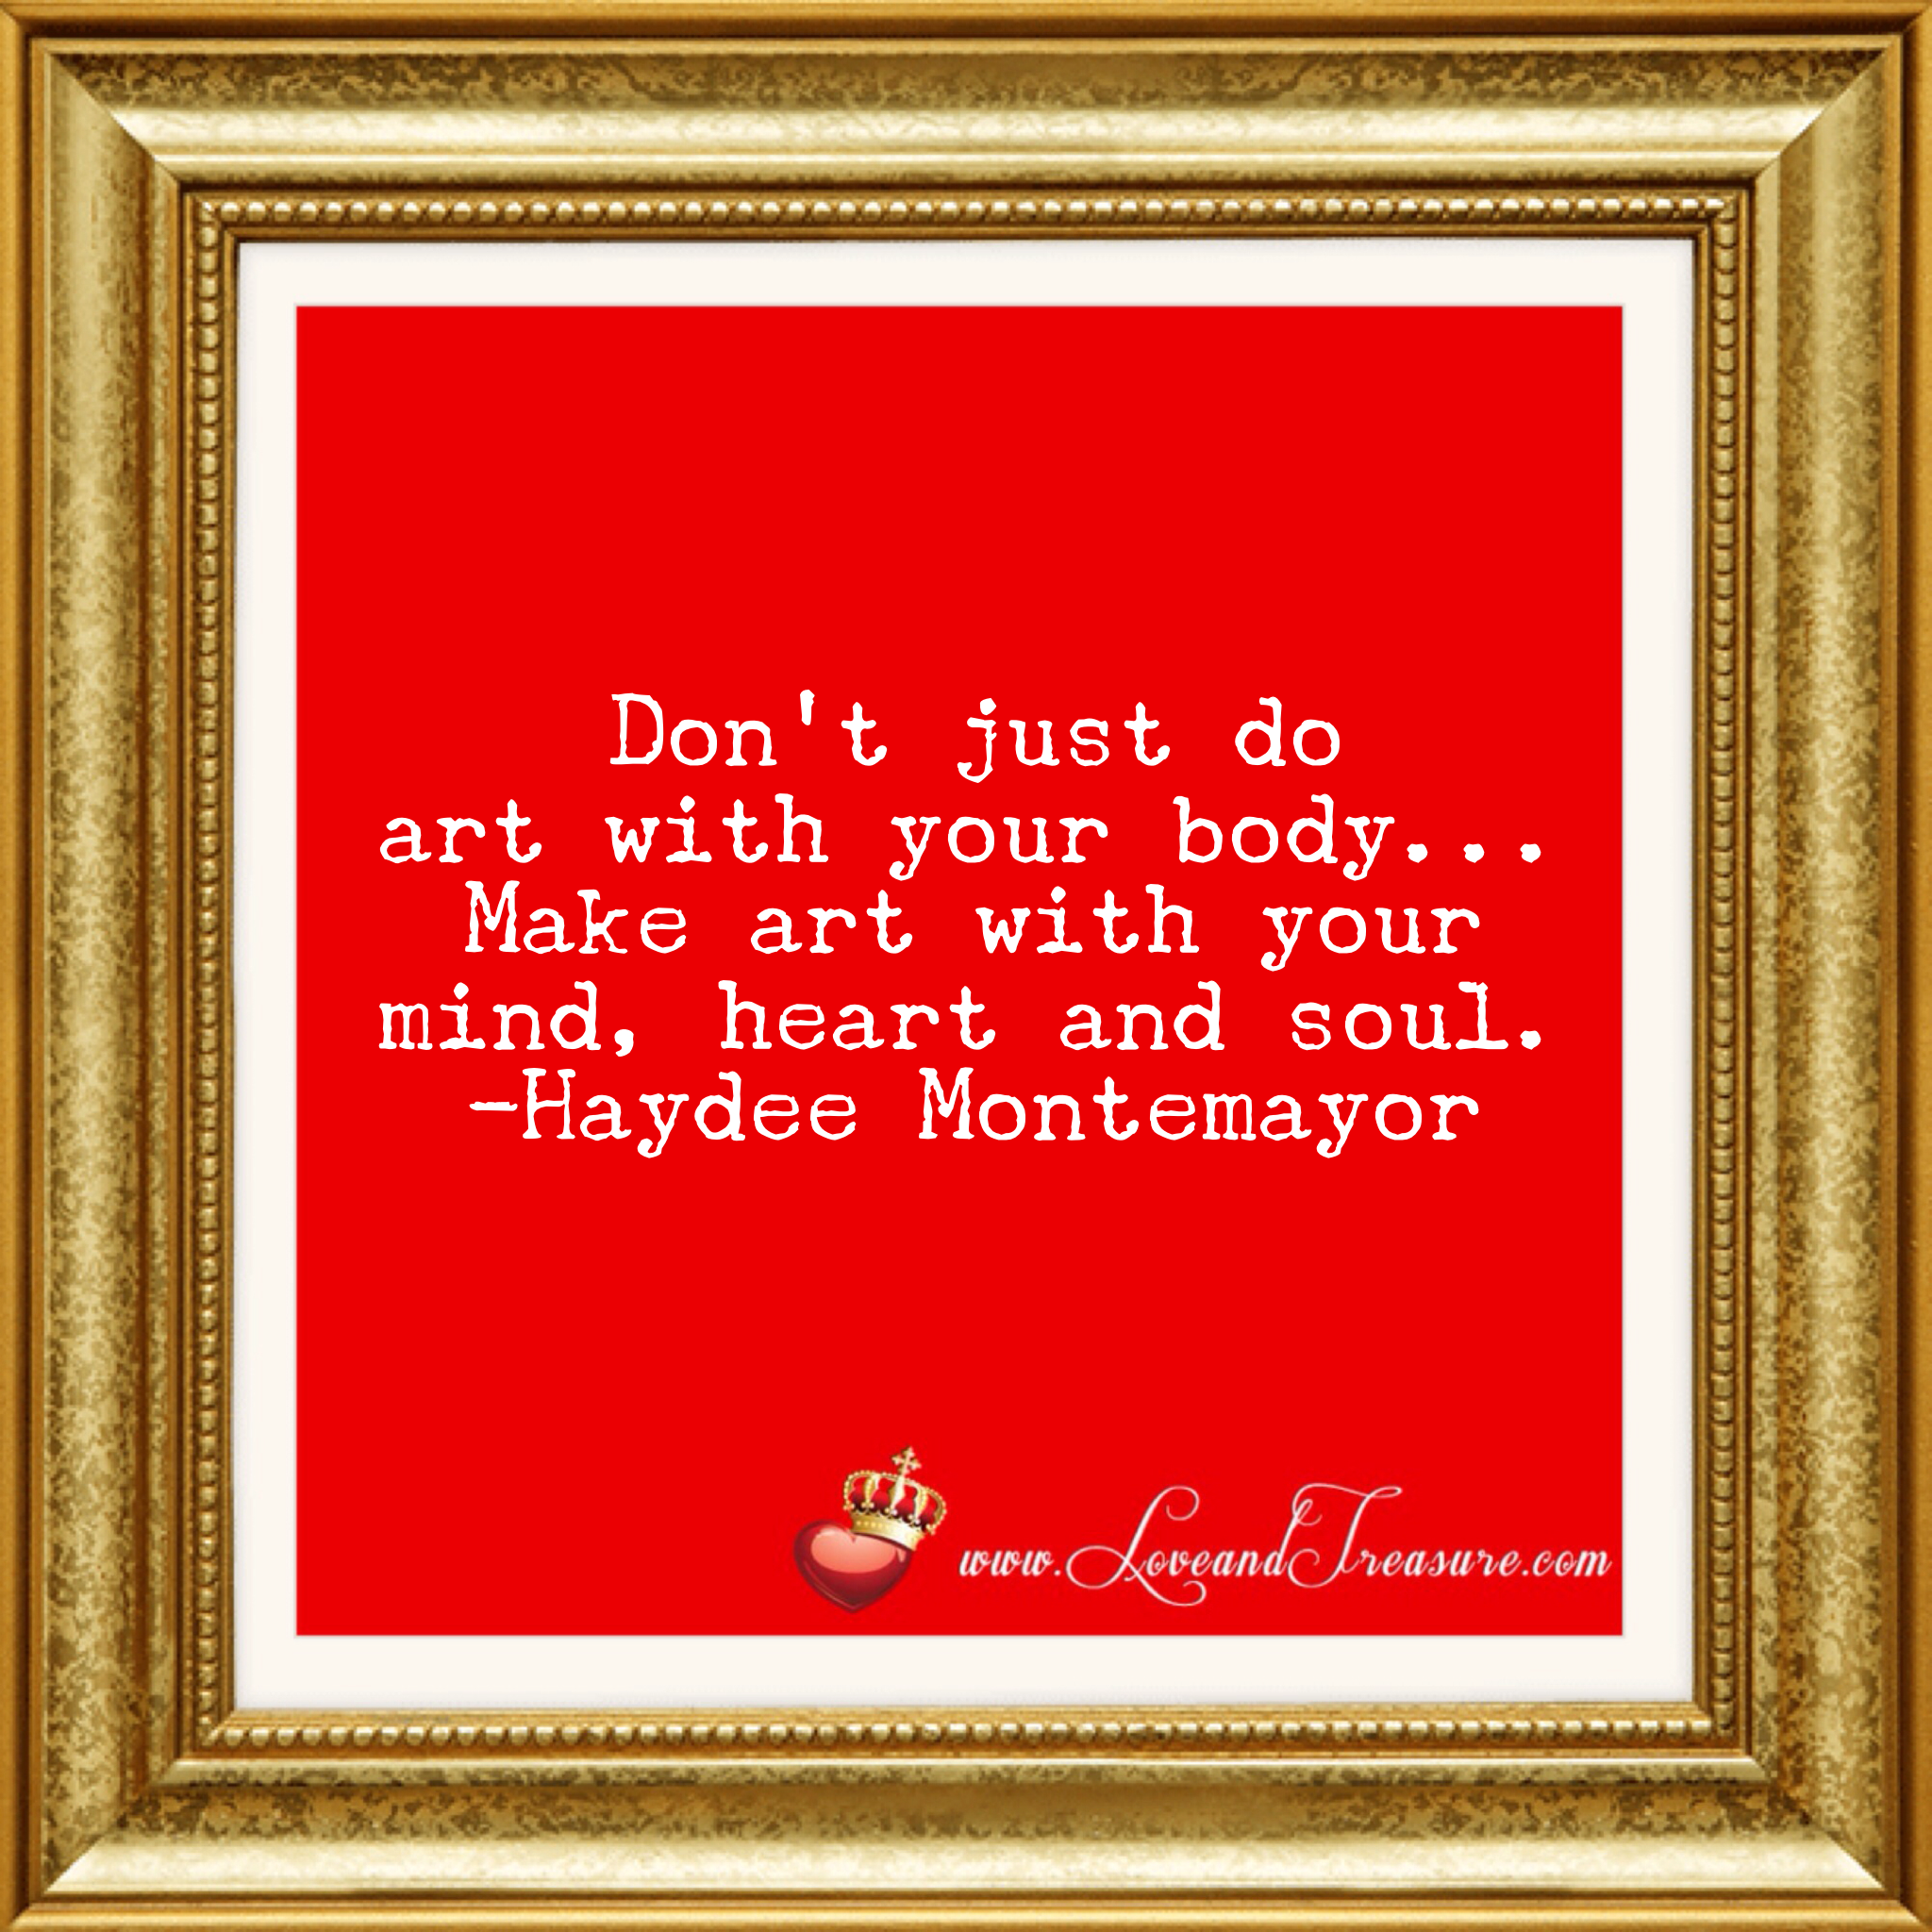 Don't just do art with your body make art with your mind, heart and soul by Haydee Montemayor from Love and Treasure blog www.loveandtreasure.com